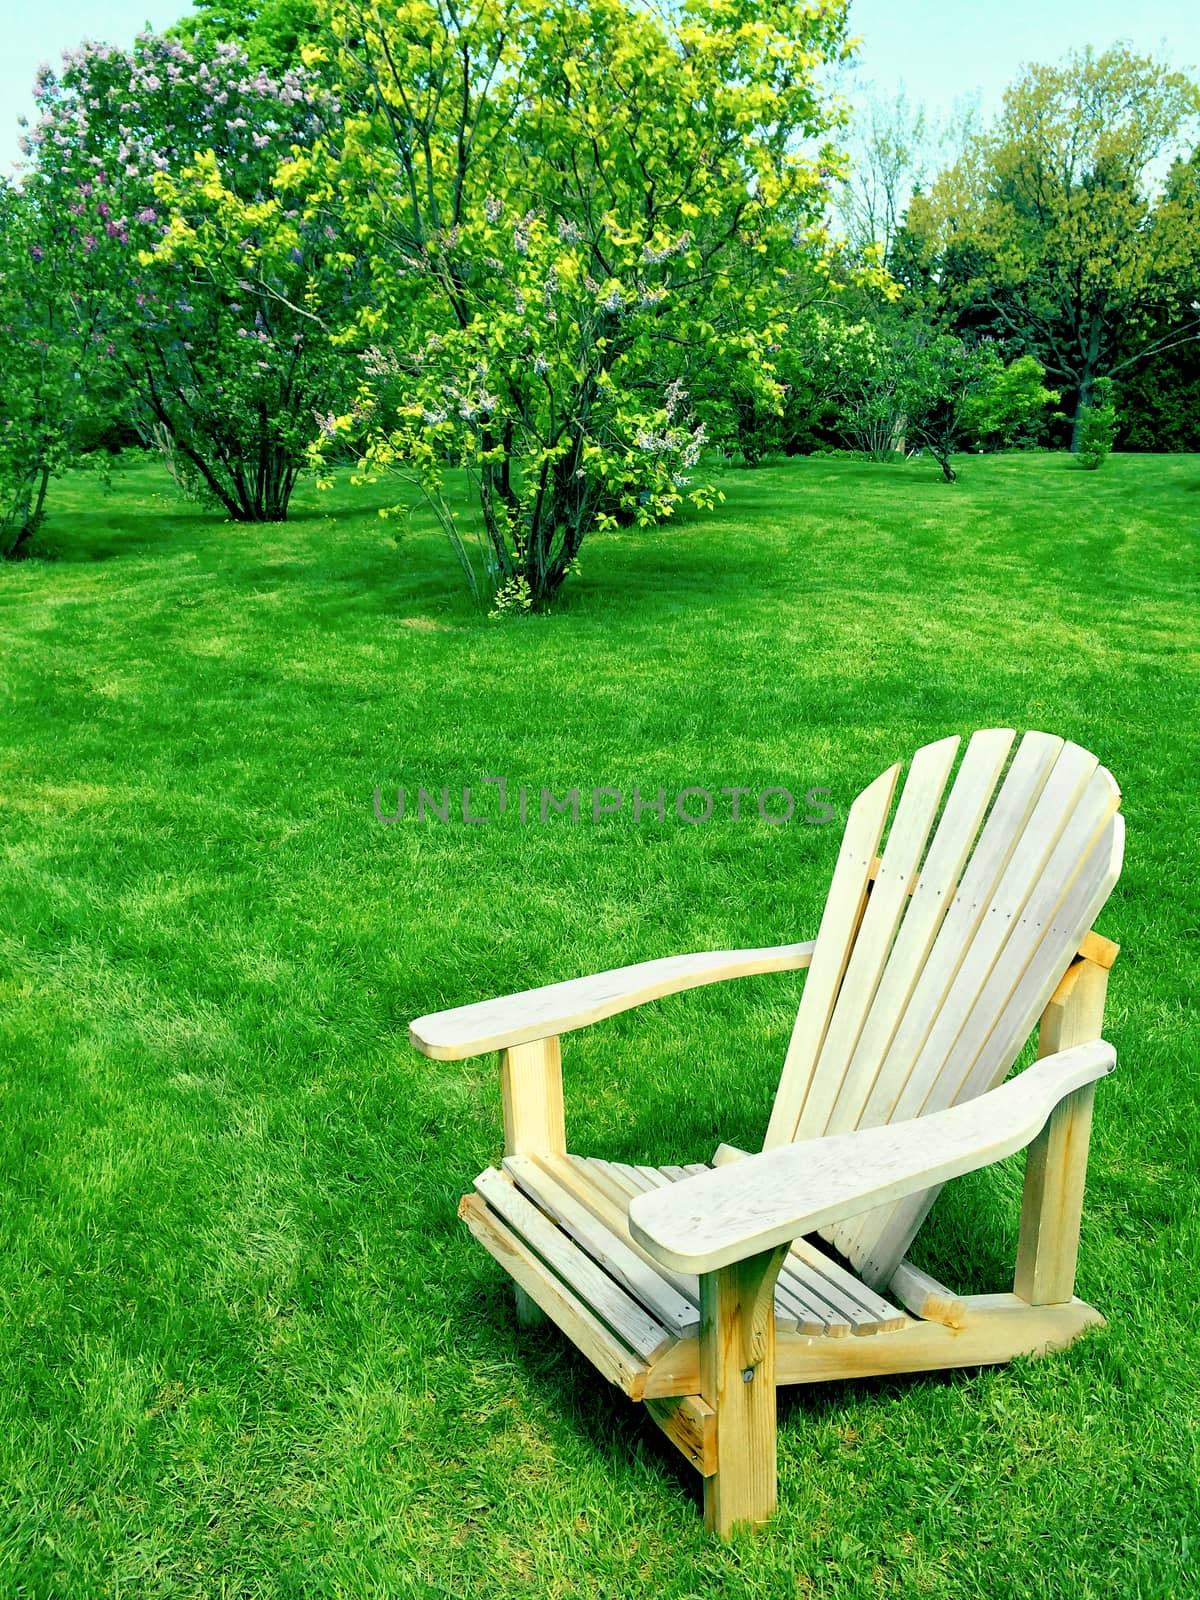 Wooden chair on a green lawn in spring garden.